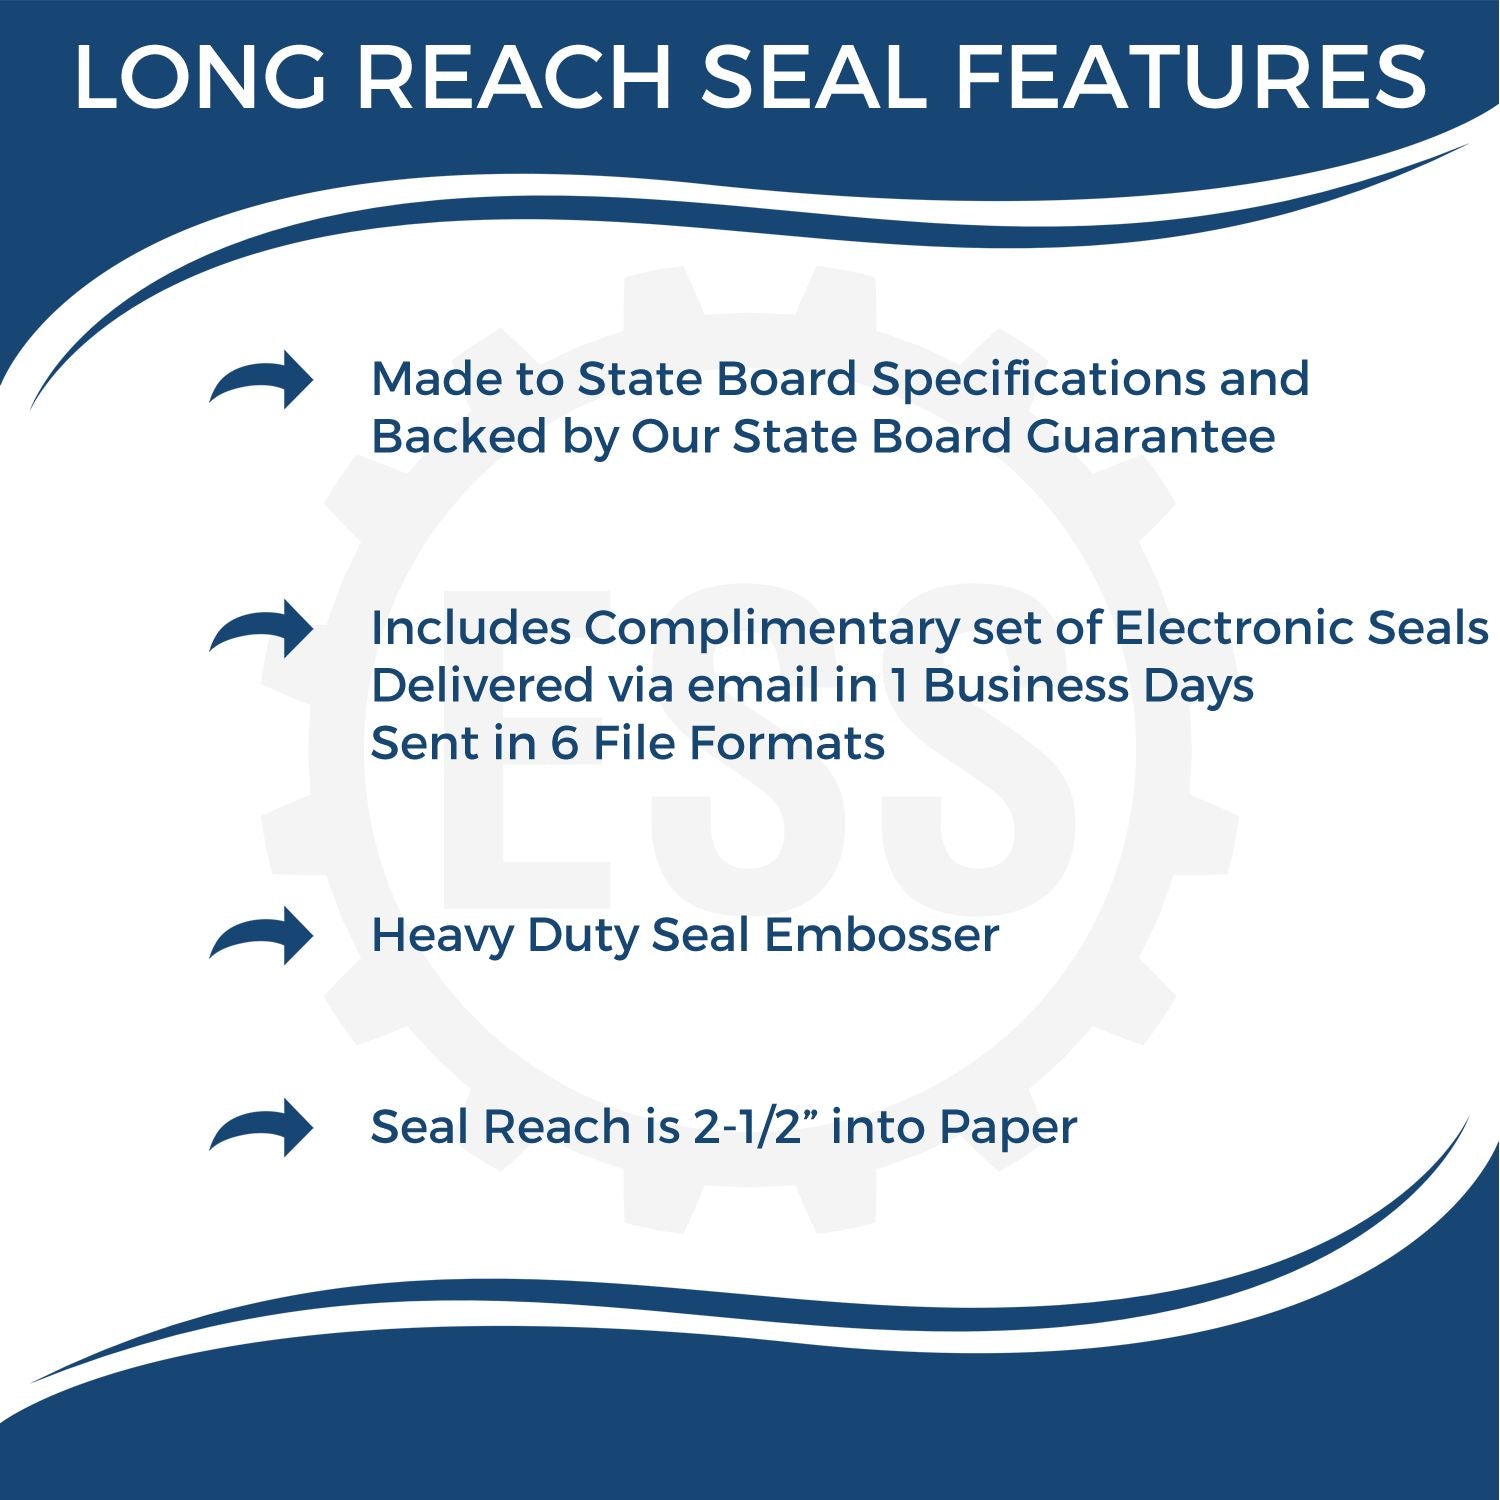 The main image for the Long Reach Utah PE Seal depicting a sample of the imprint and electronic files